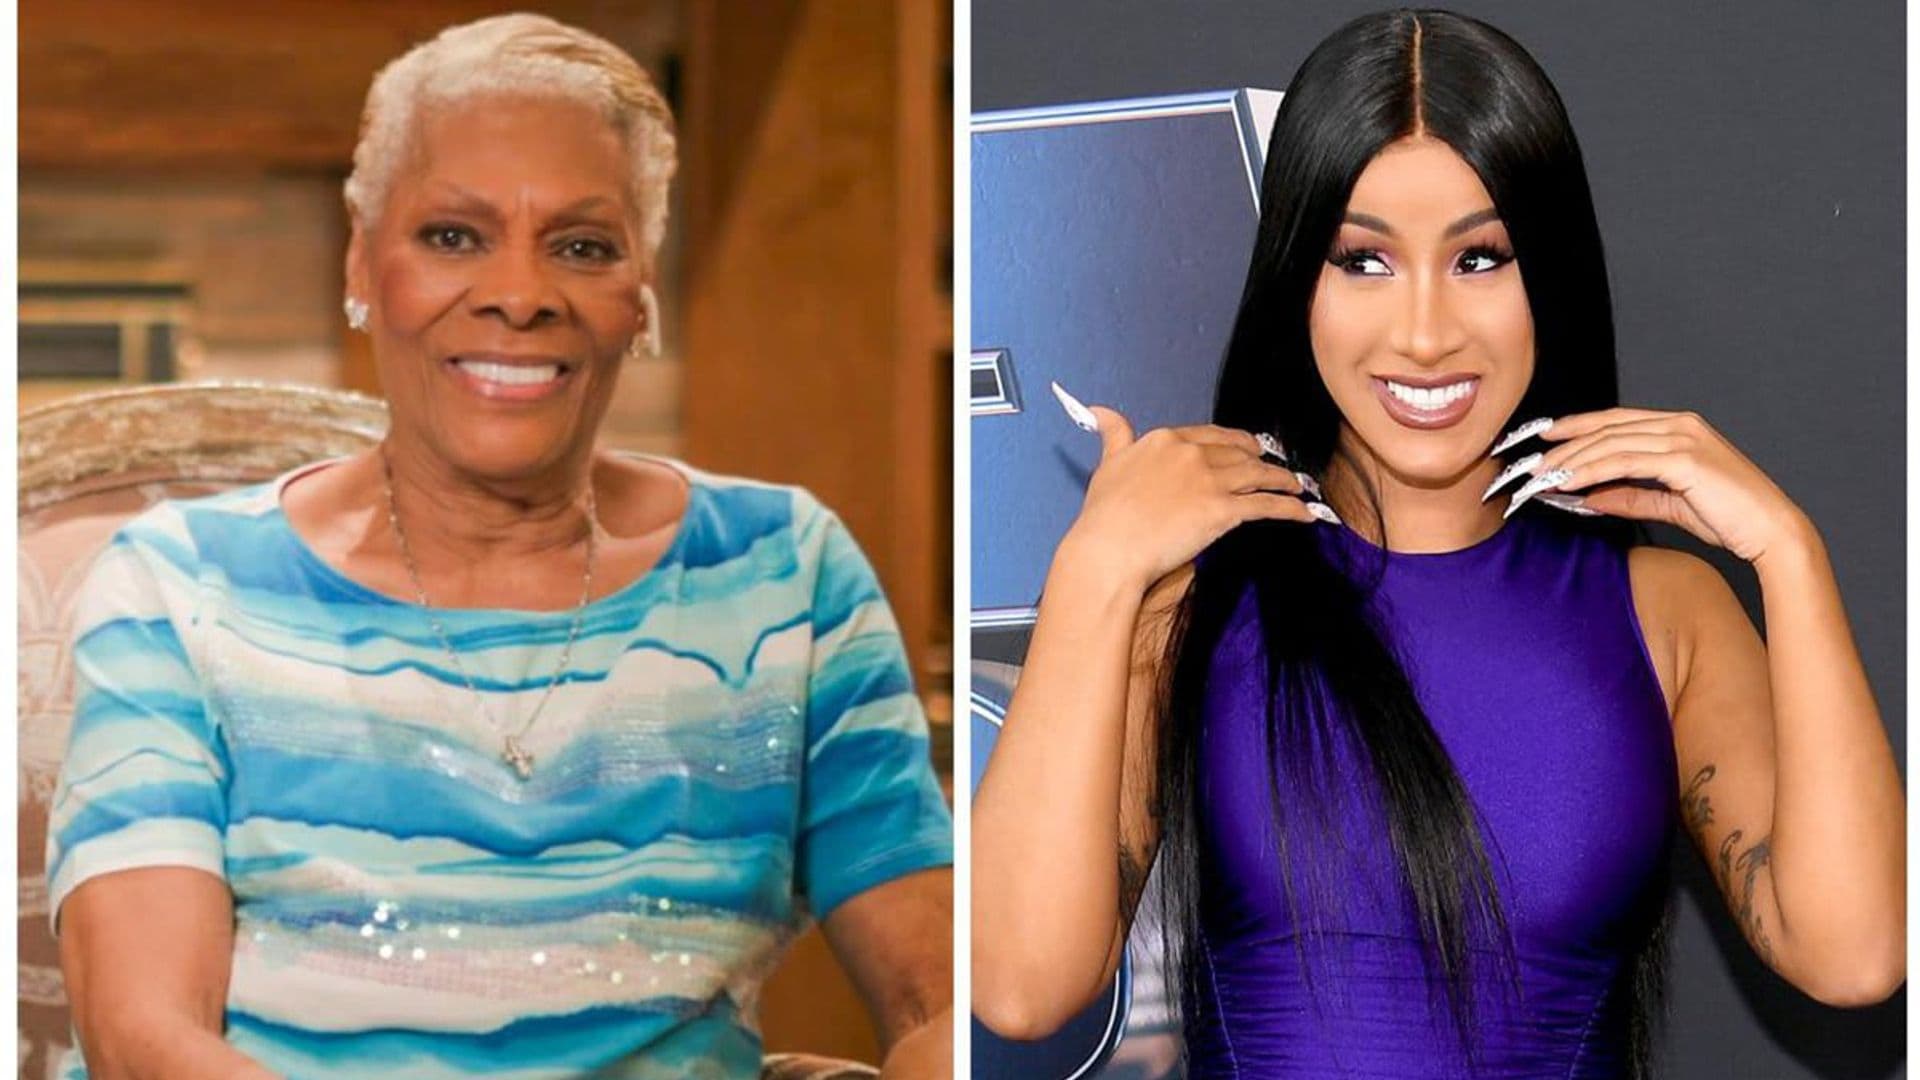 Singer Dionne Warwick got introduced to Cardi B, and now she has some questions